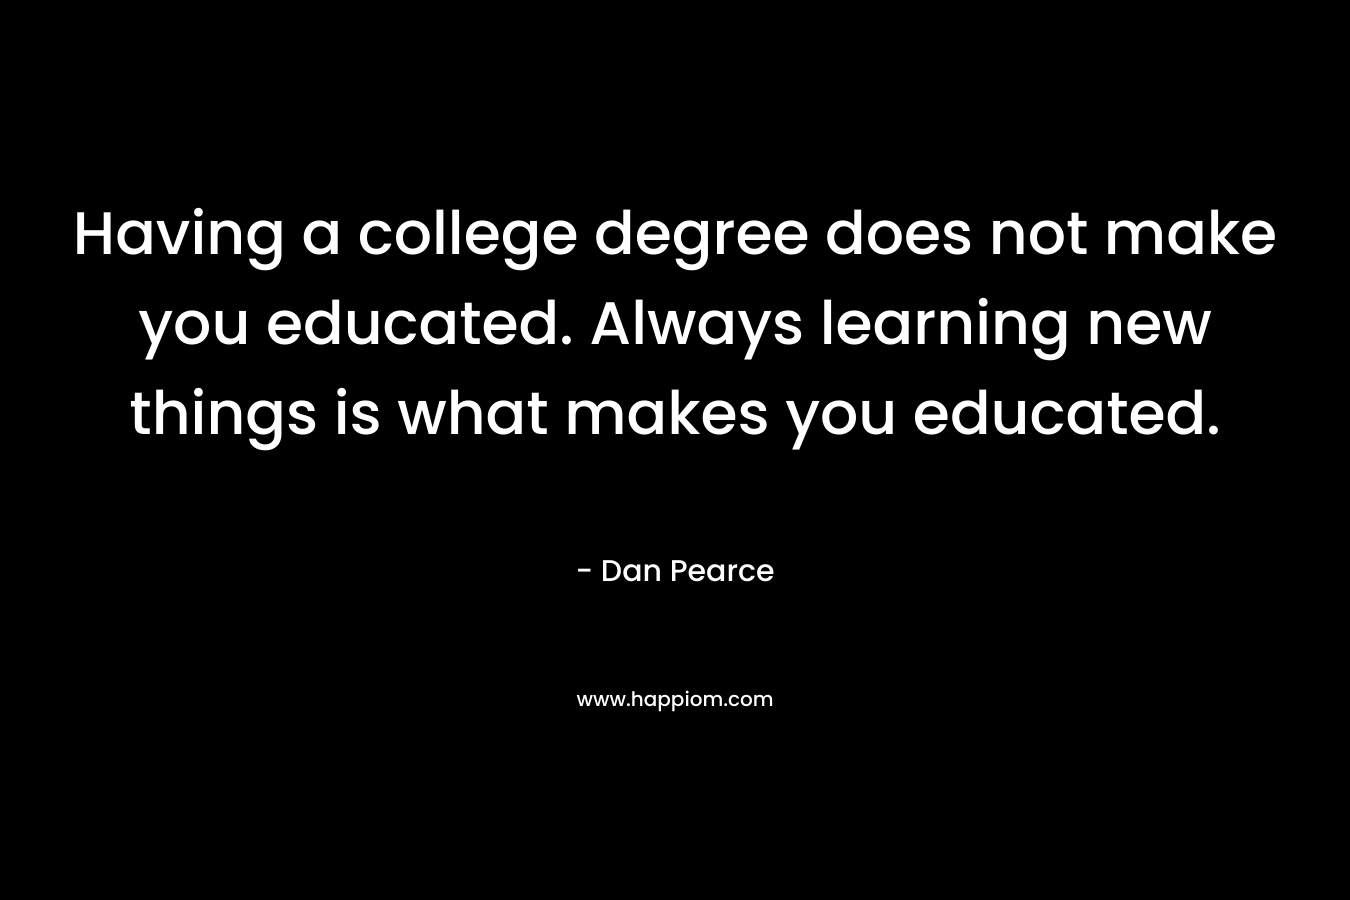 Having a college degree does not make you educated. Always learning new things is what makes you educated. – Dan Pearce